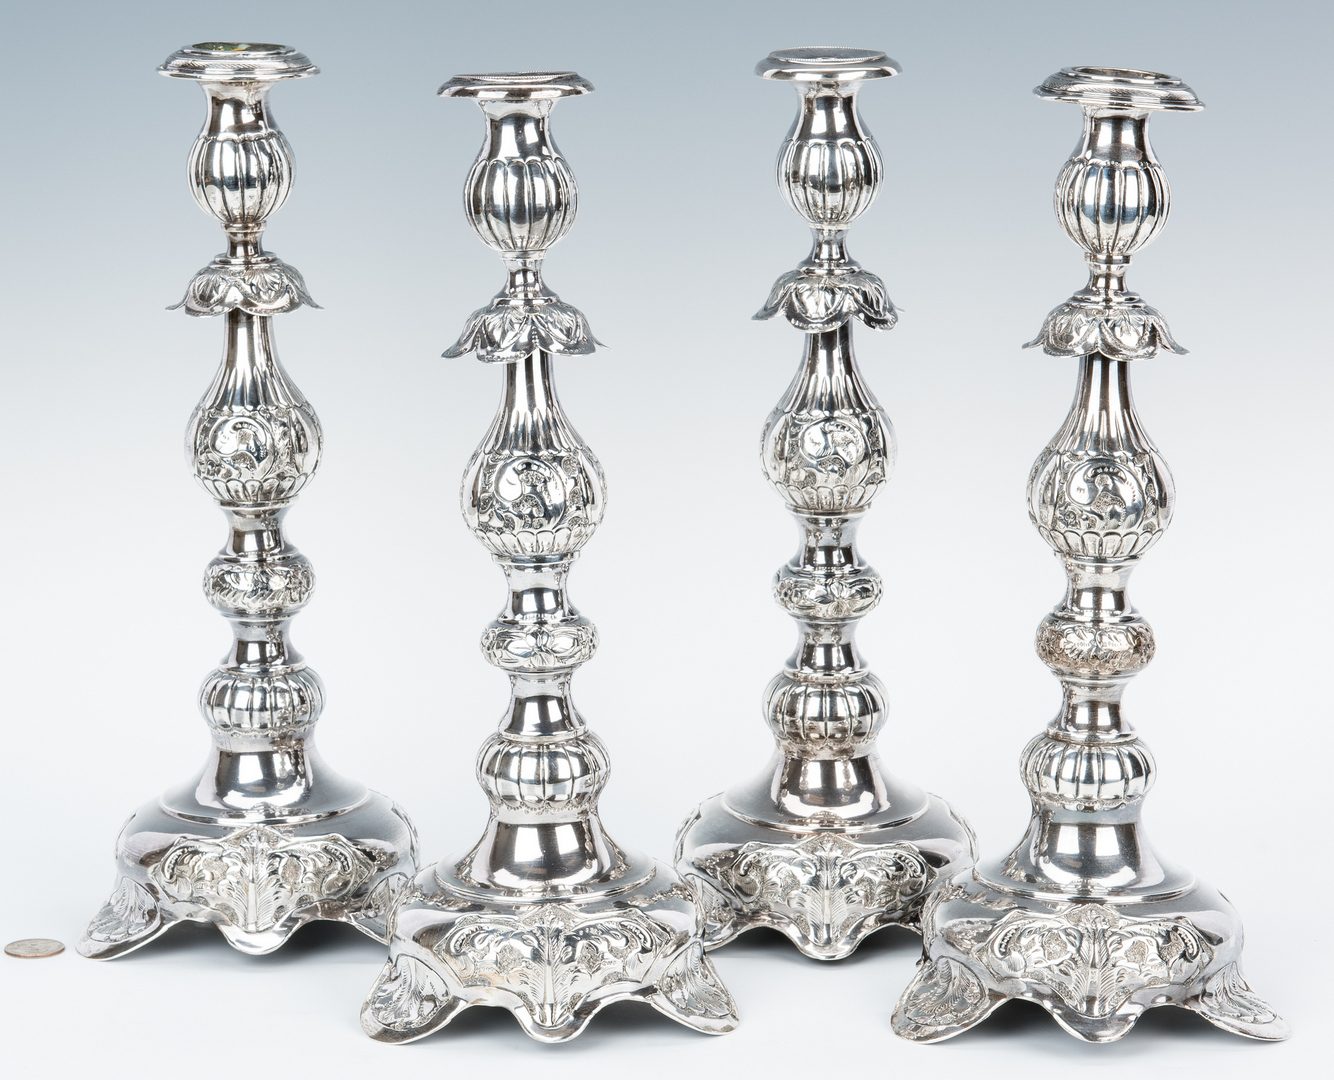 Lot 412: 4 Russian Baroque Style Silver Candlesticks